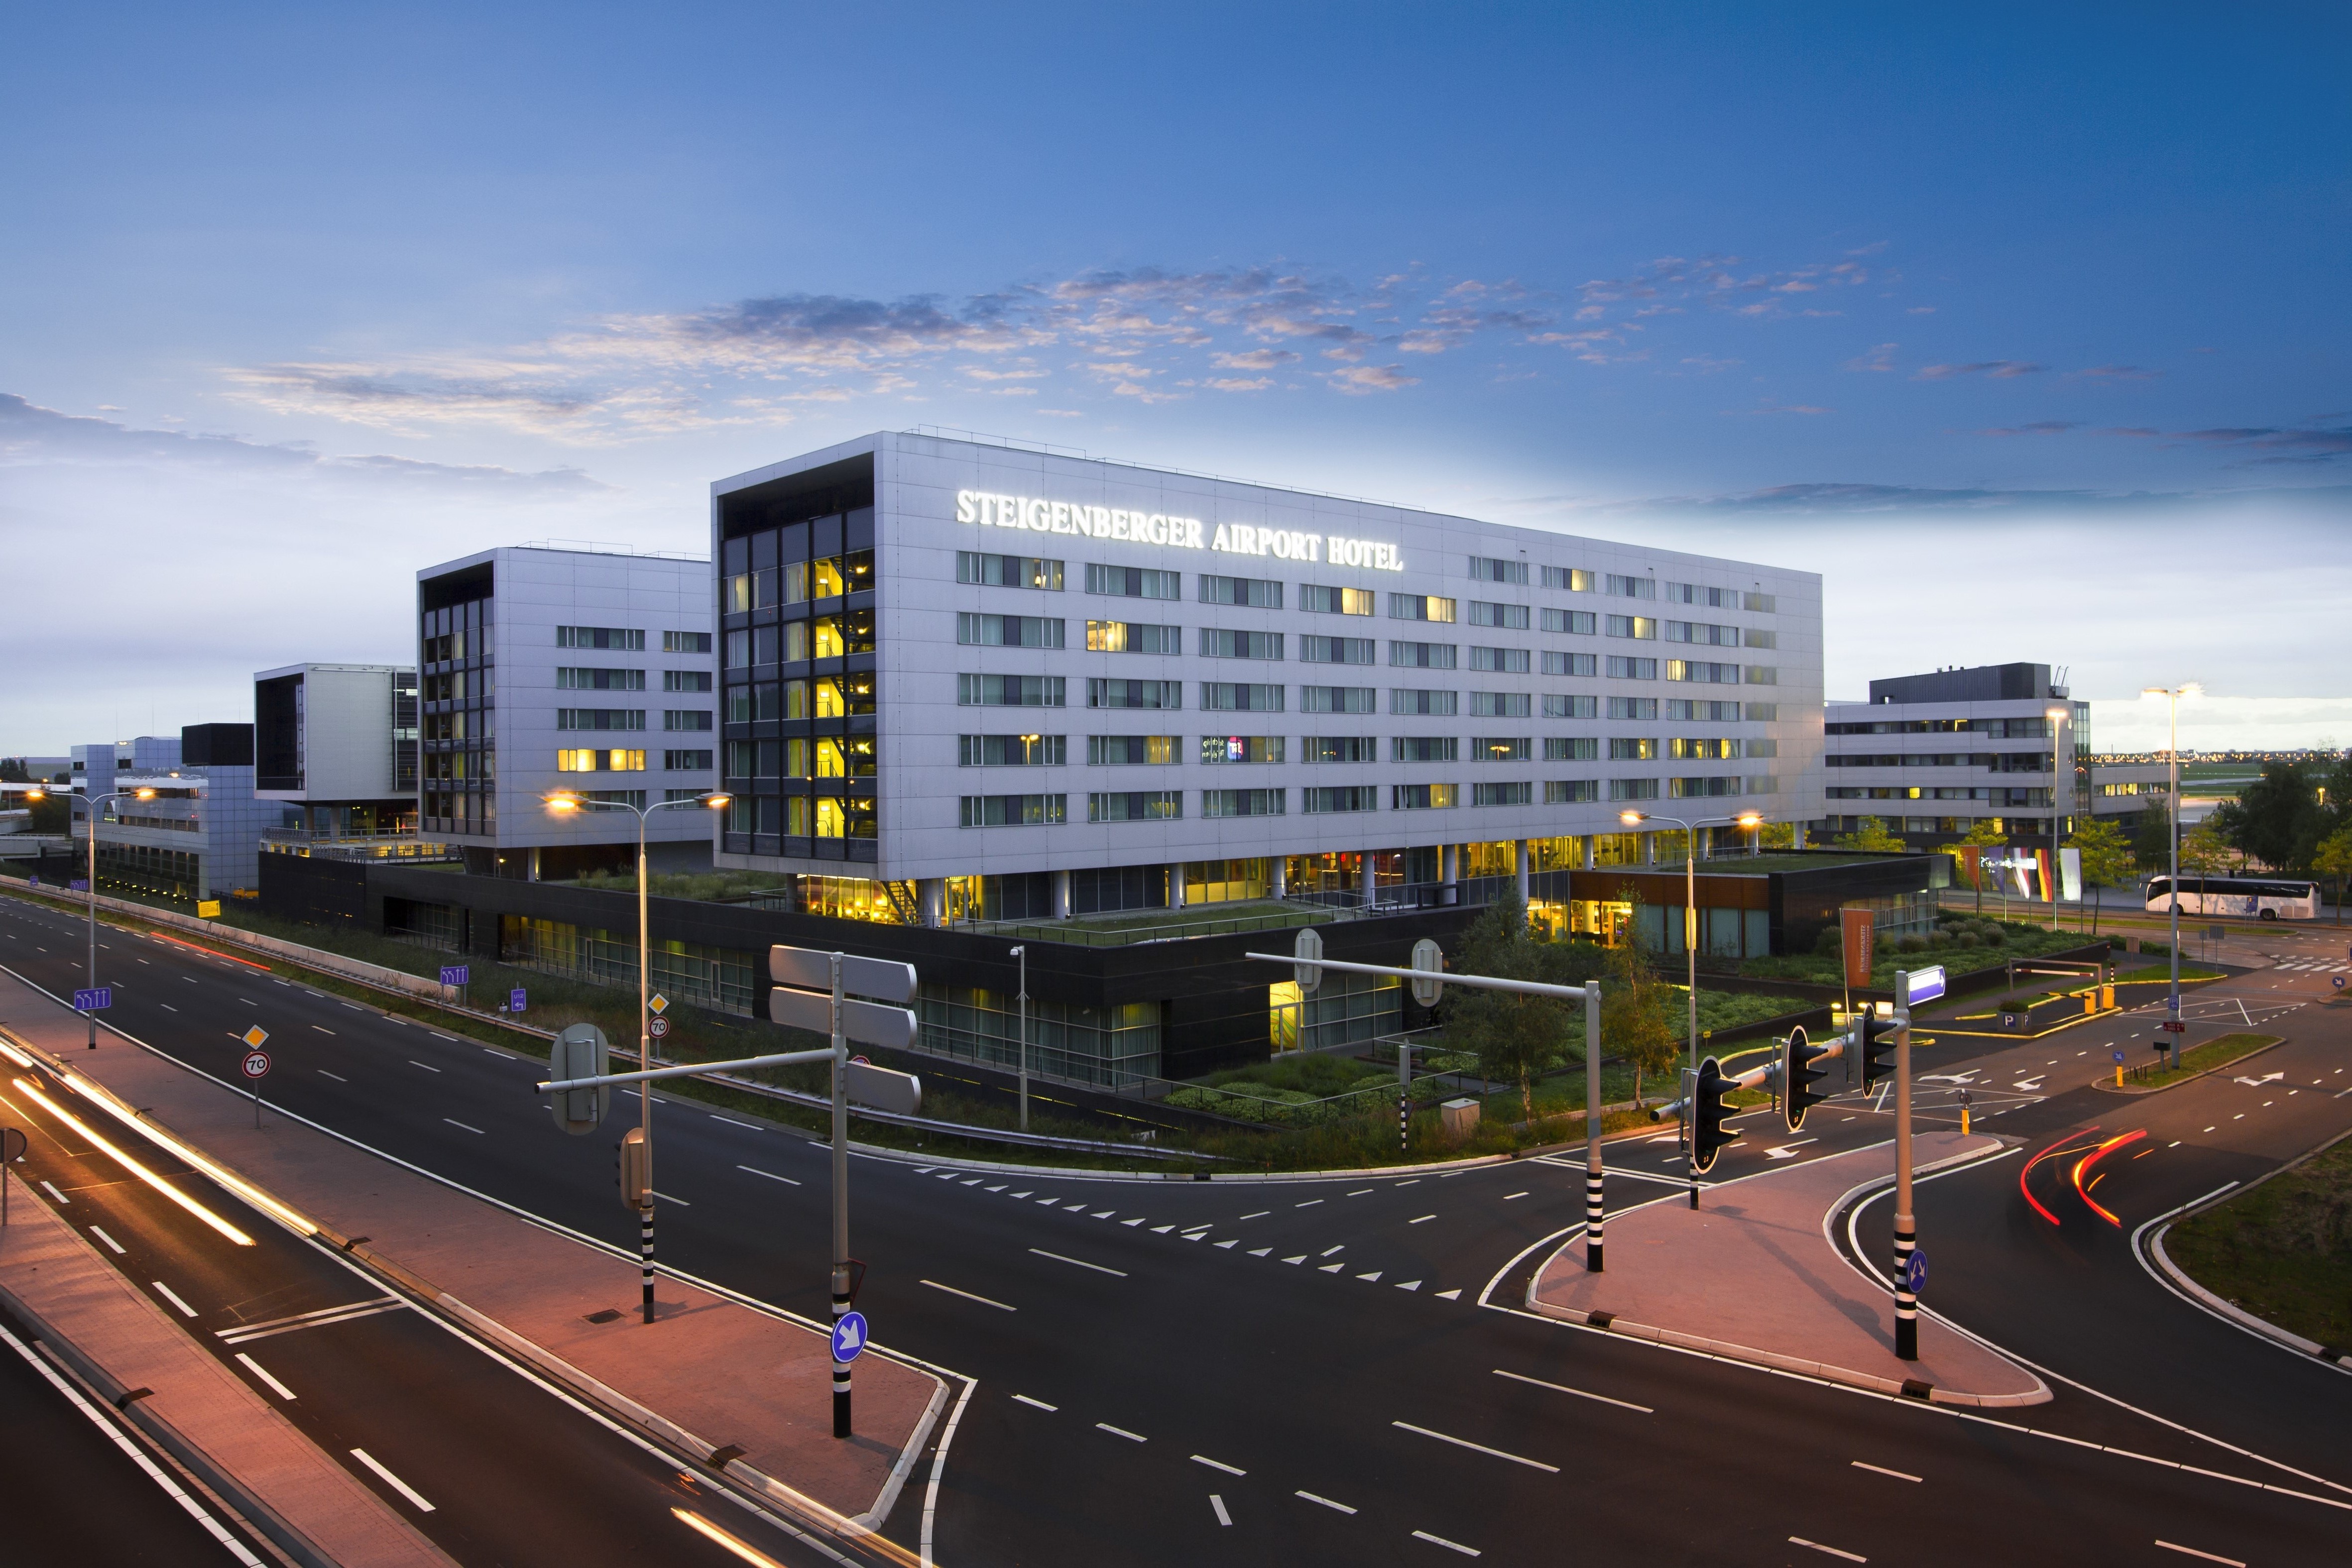 Steigenberger Airport Hotel Amsterdam <br/>60.00 ew <br/> <a href='http://vakantieoplossing.nl/outpage/?id=585ba6743f0a88dbcc2b200534a2b68c' target='_blank'>View Details</a>